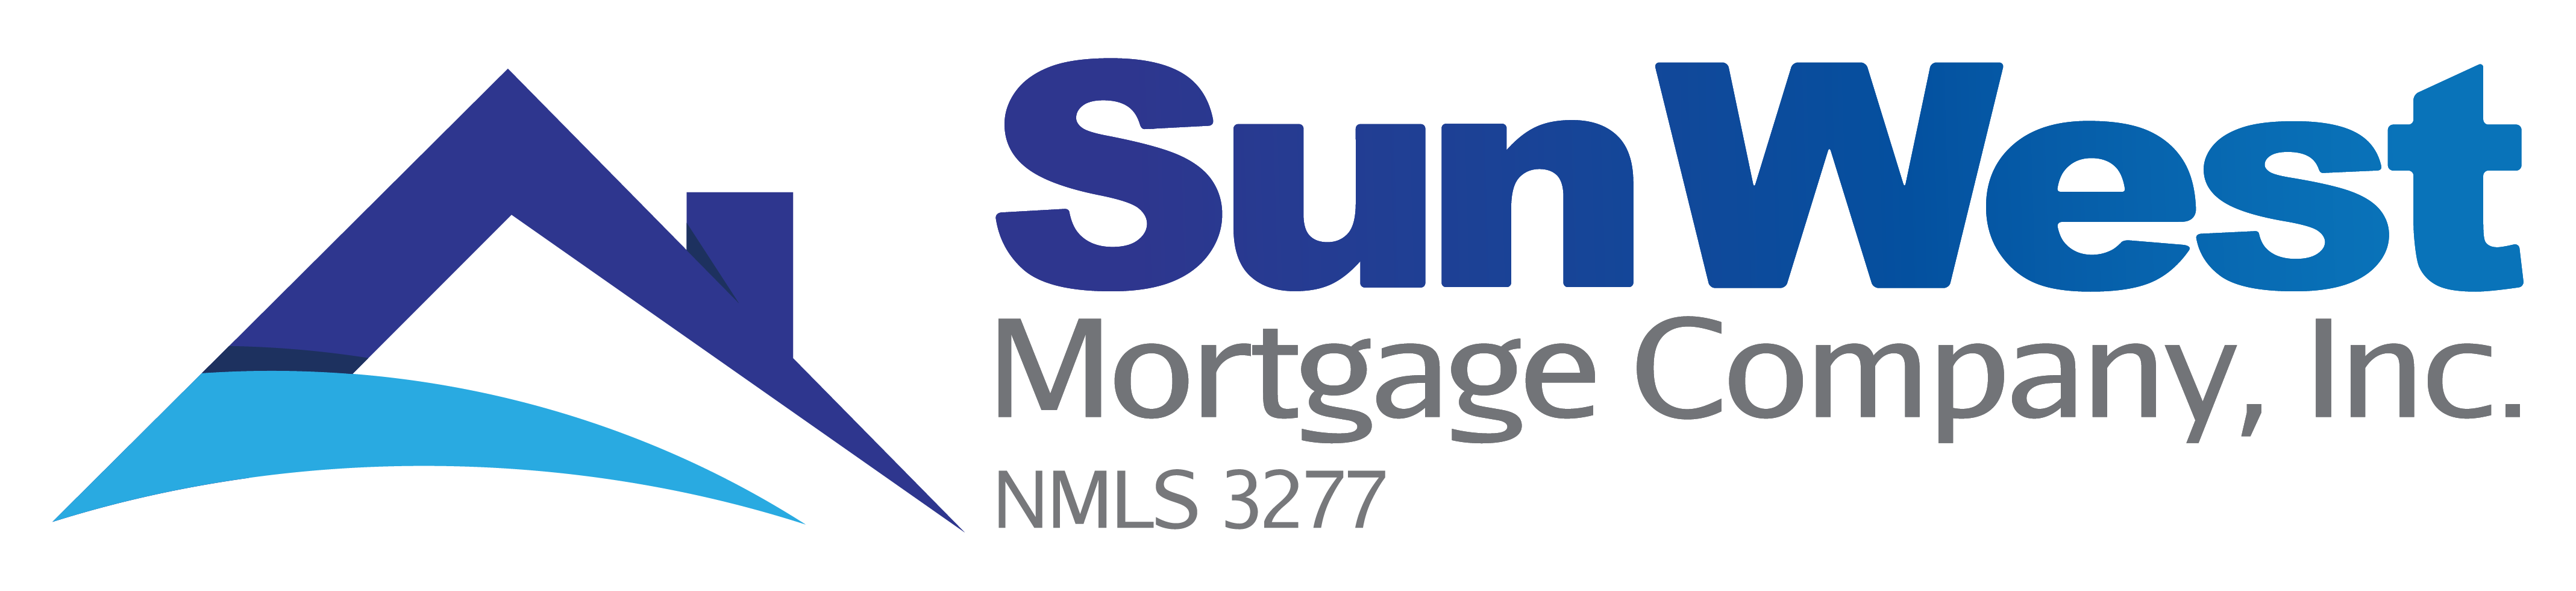 OptifiNow has announced that Sun West Mortgage Company has launched their cloud-based CRM and marketing automation platform for wholesale, distributed retail and their all new Home Buyer Connect (HBC) mortgage lending channels